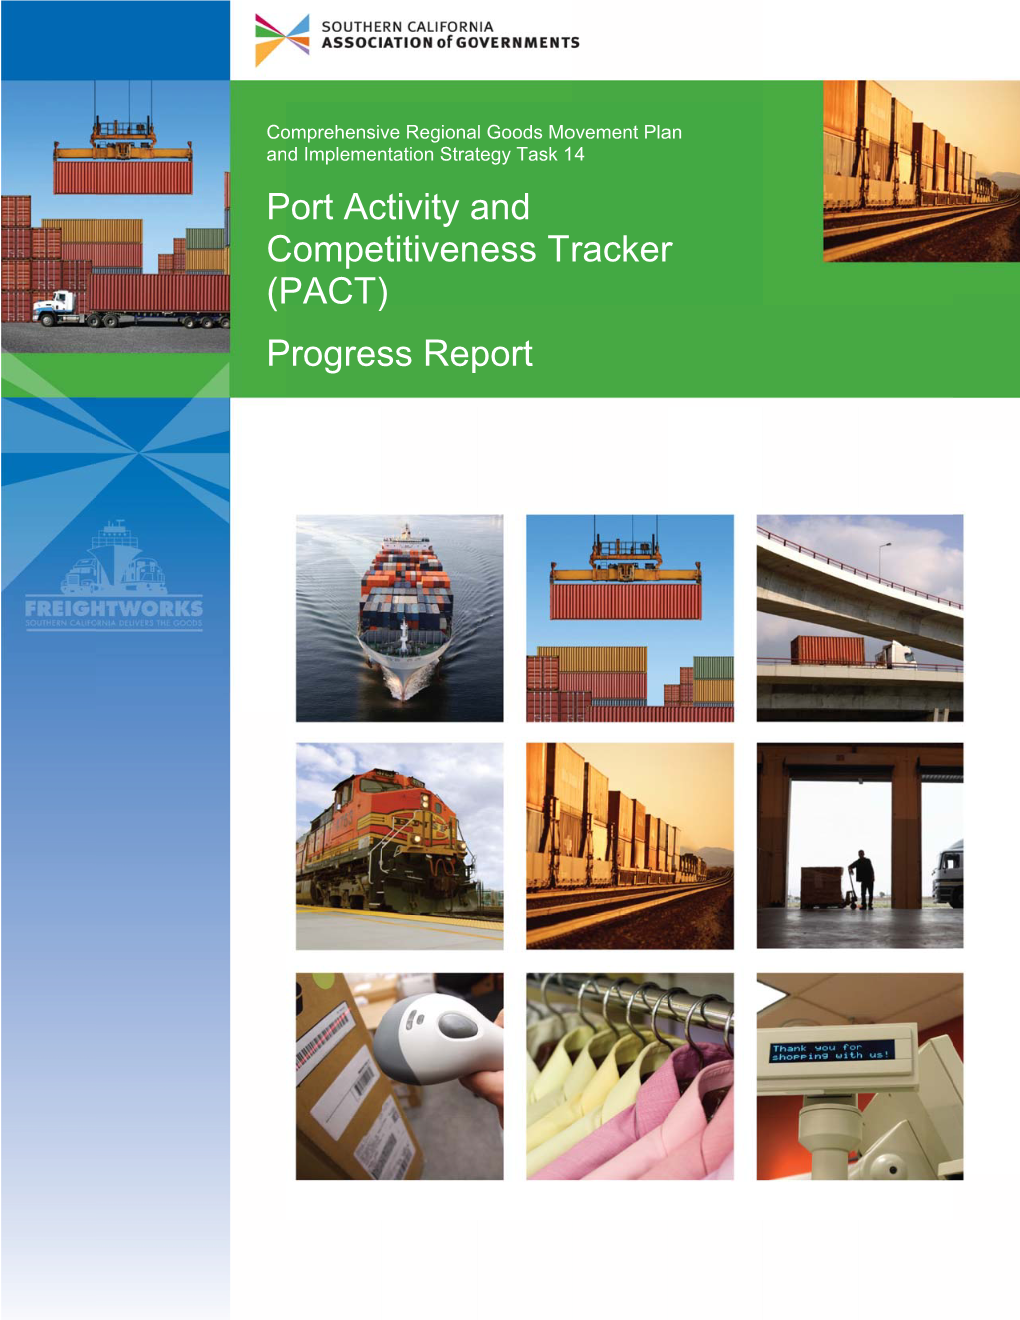 Port Activity Competitiveness Tracker (PACT)